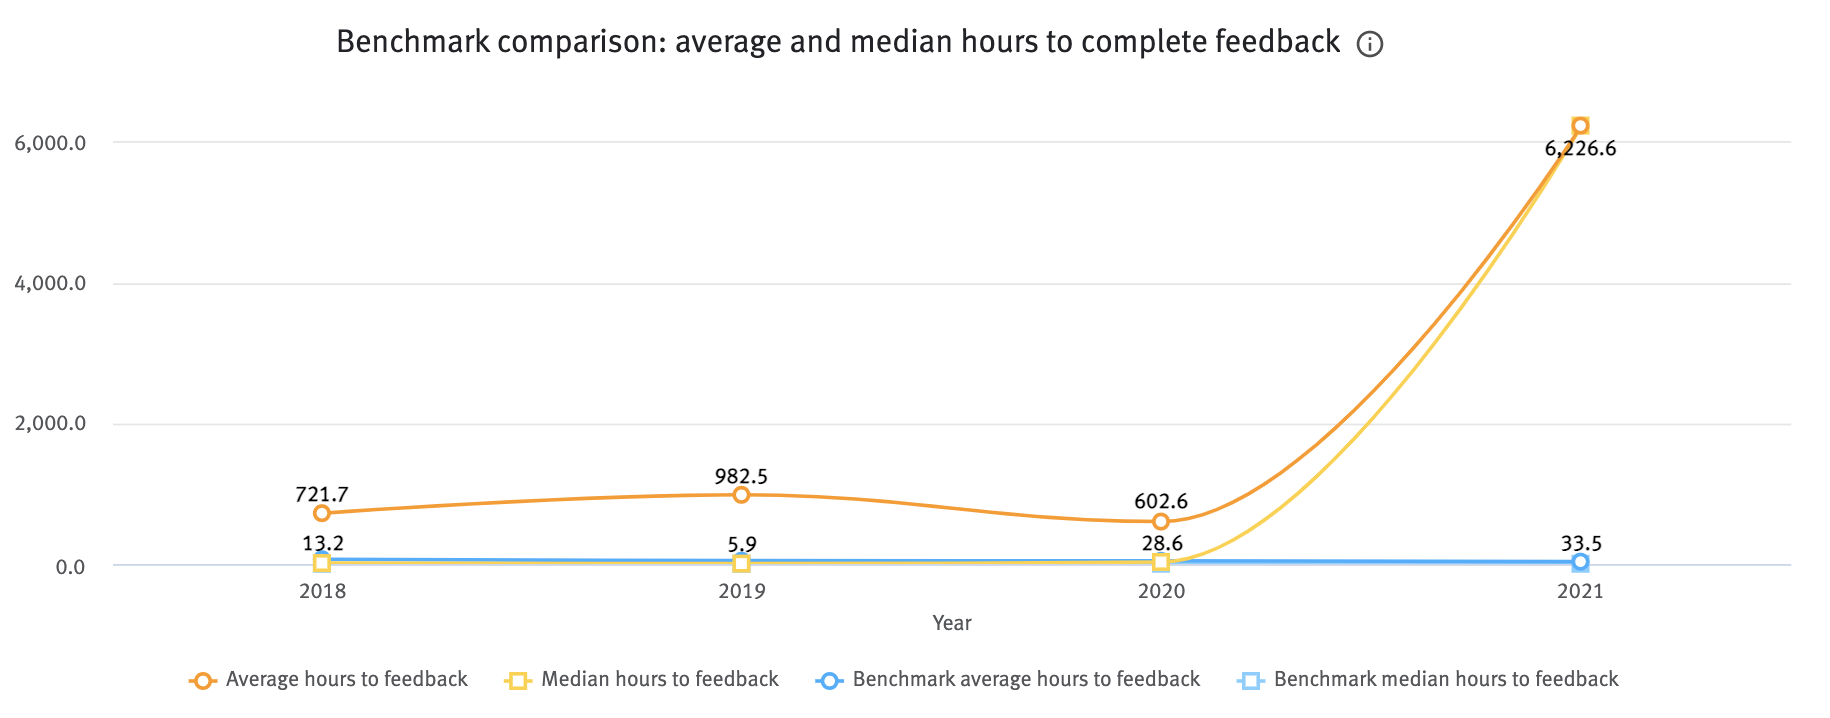 Benchmark comparison average and median hours to complete feedback chart